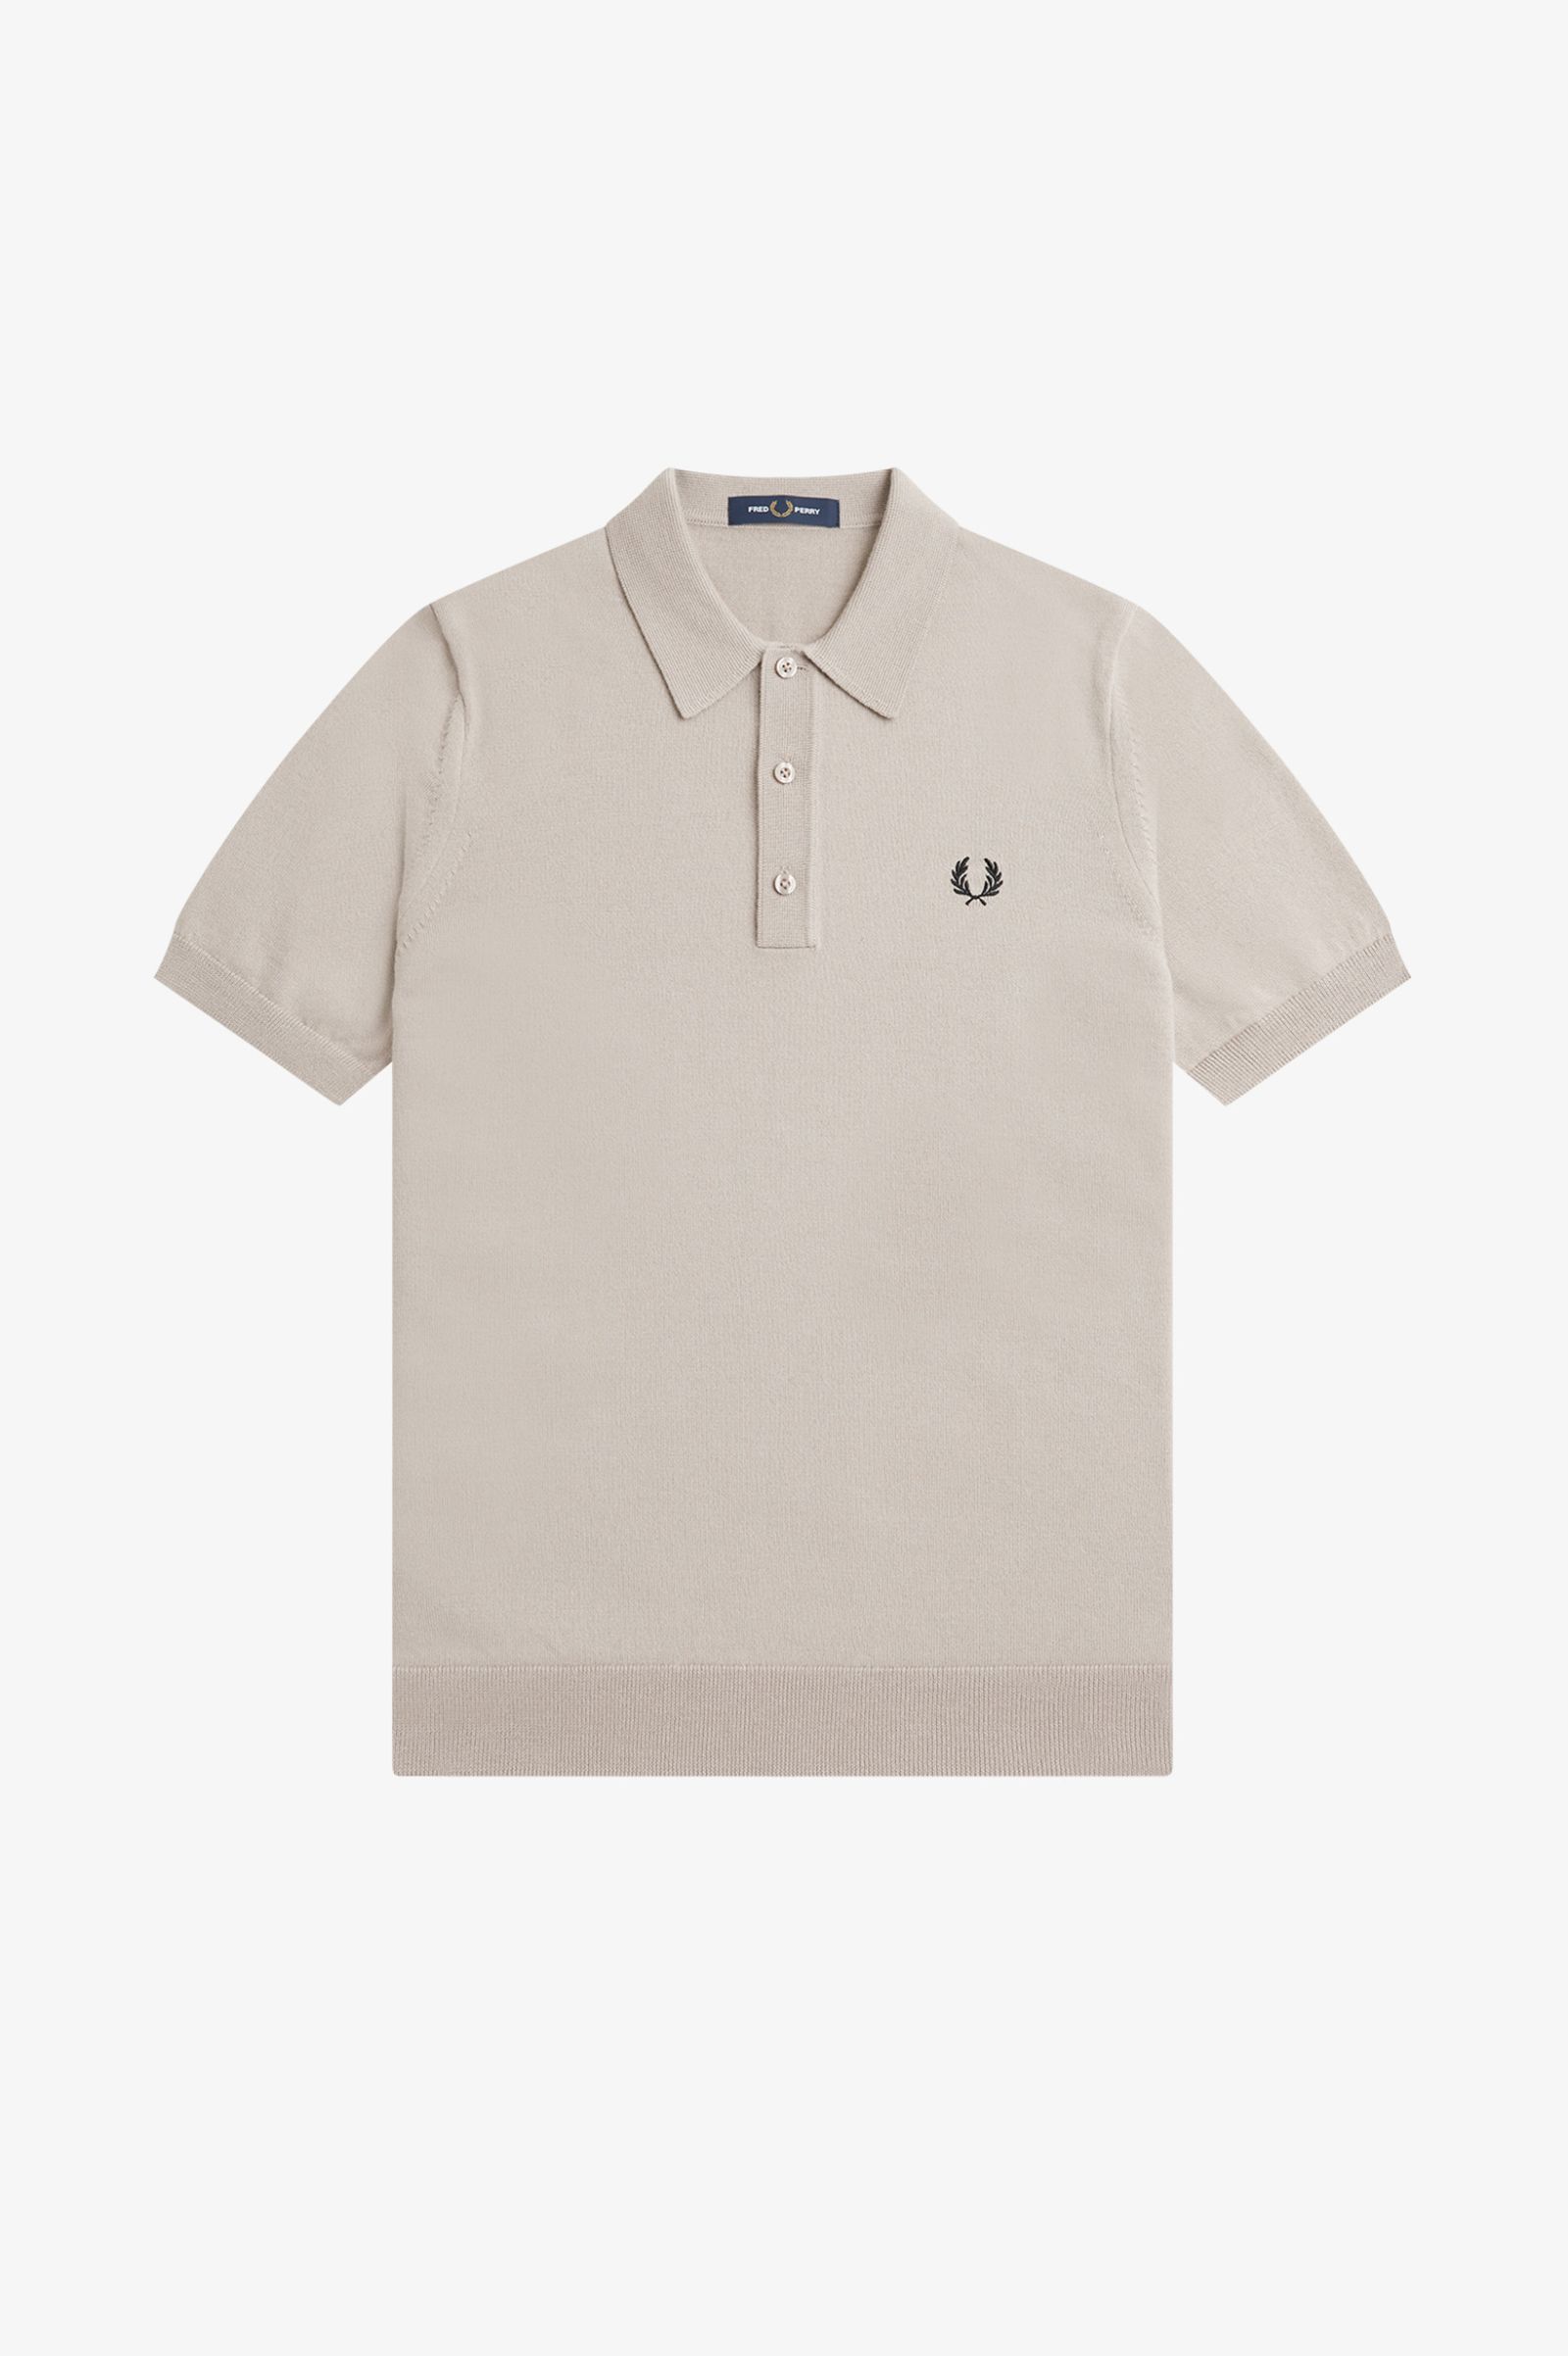 Fred Perry Classic Knitted Shirt in Dark Oatmeal